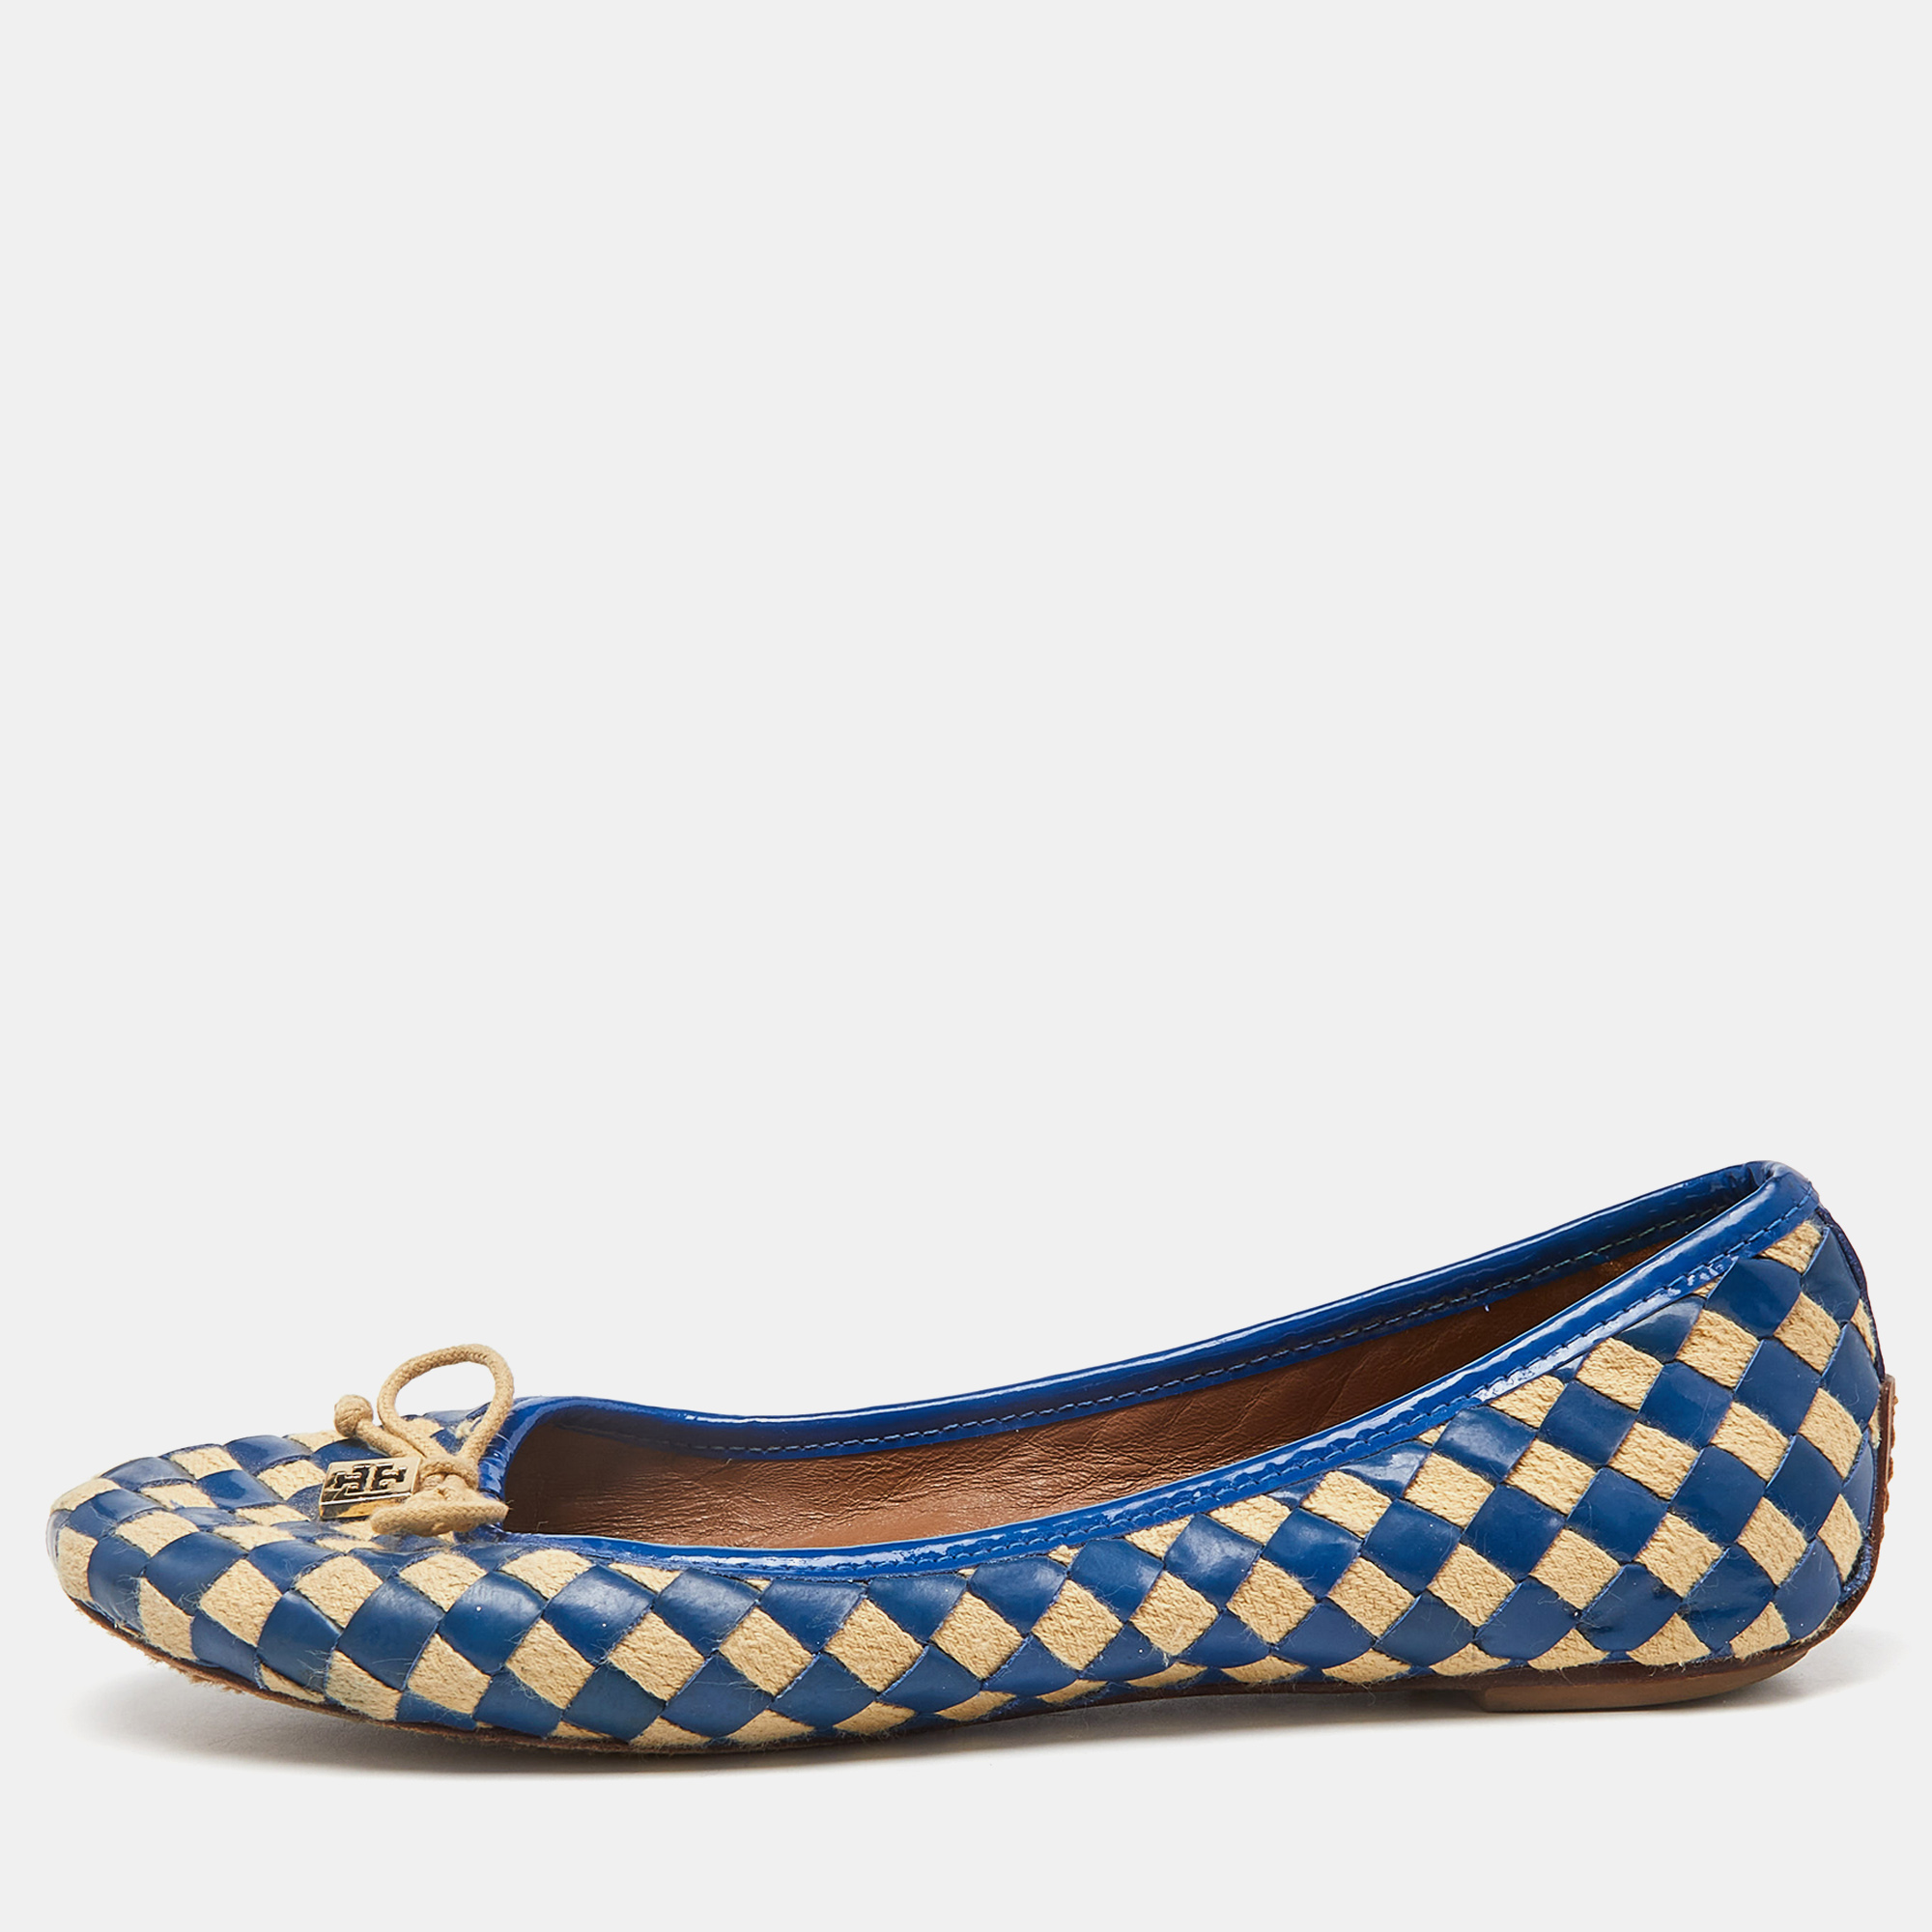 

Tory Burch Blue/Beige Patent Leather and Woven Fabric Ballet Flats Size